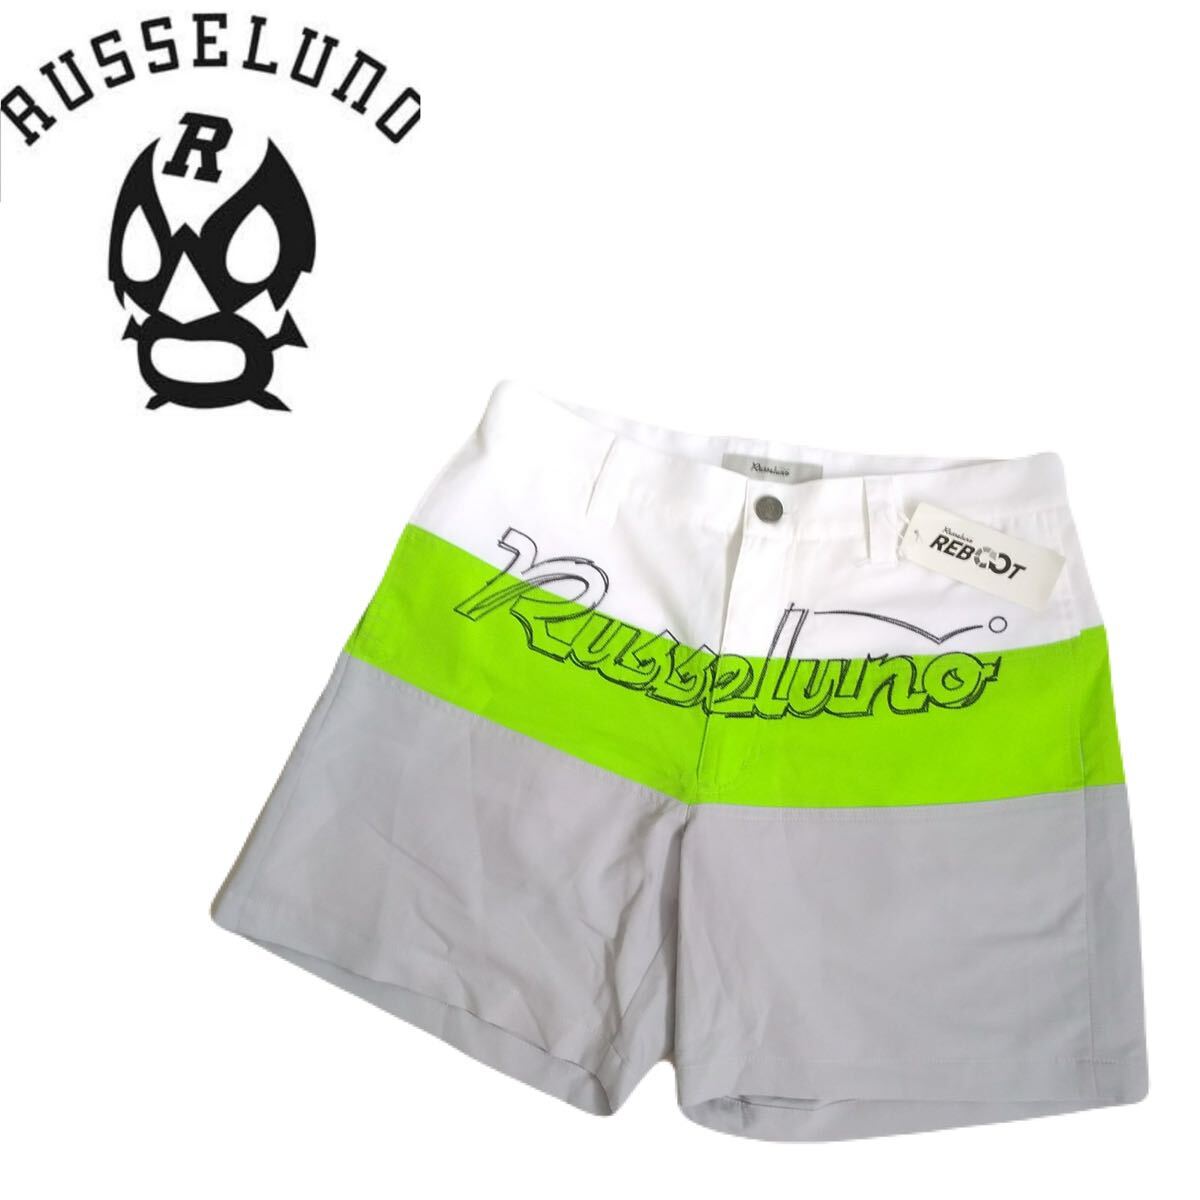  new goods tag attaching mask man Russeluno light weight .. stretch big Logo shorts Golf pants men's 4 russell no Golf wear 2404243